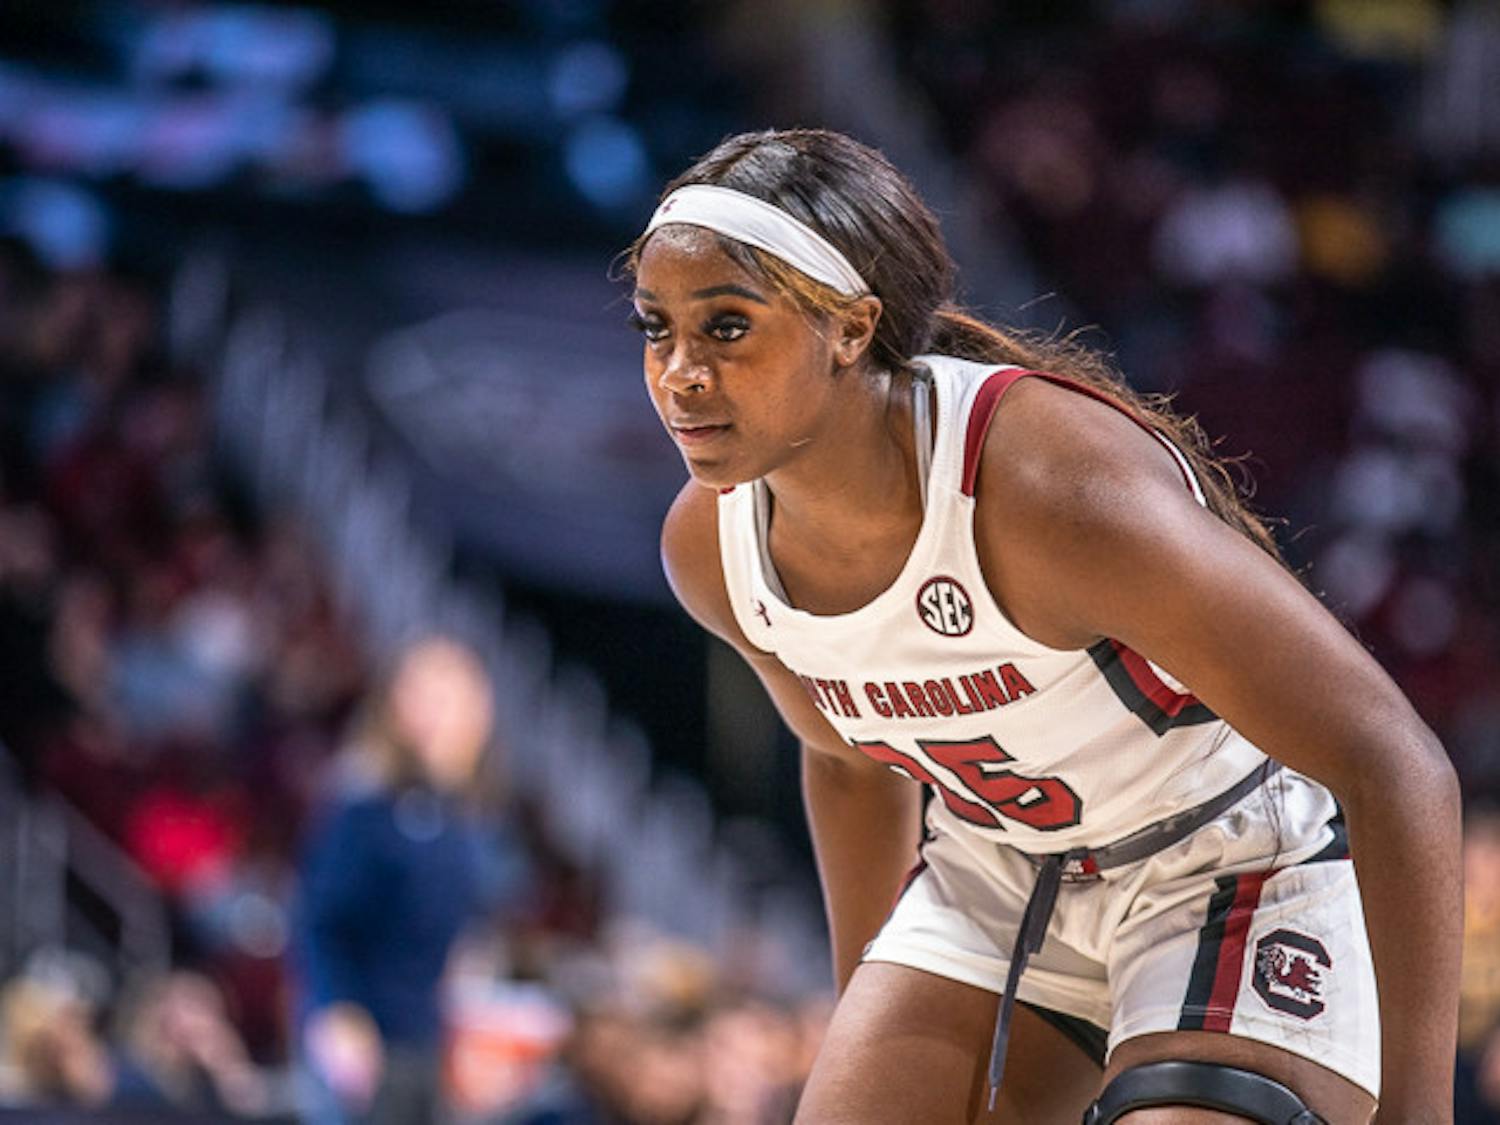 Redshirt freshman guard Raven Johnson gets ready to box out her opponent during free throws. Johnson scored nine points during South Carolina's 101-31 win over Eastern Tennessee State.